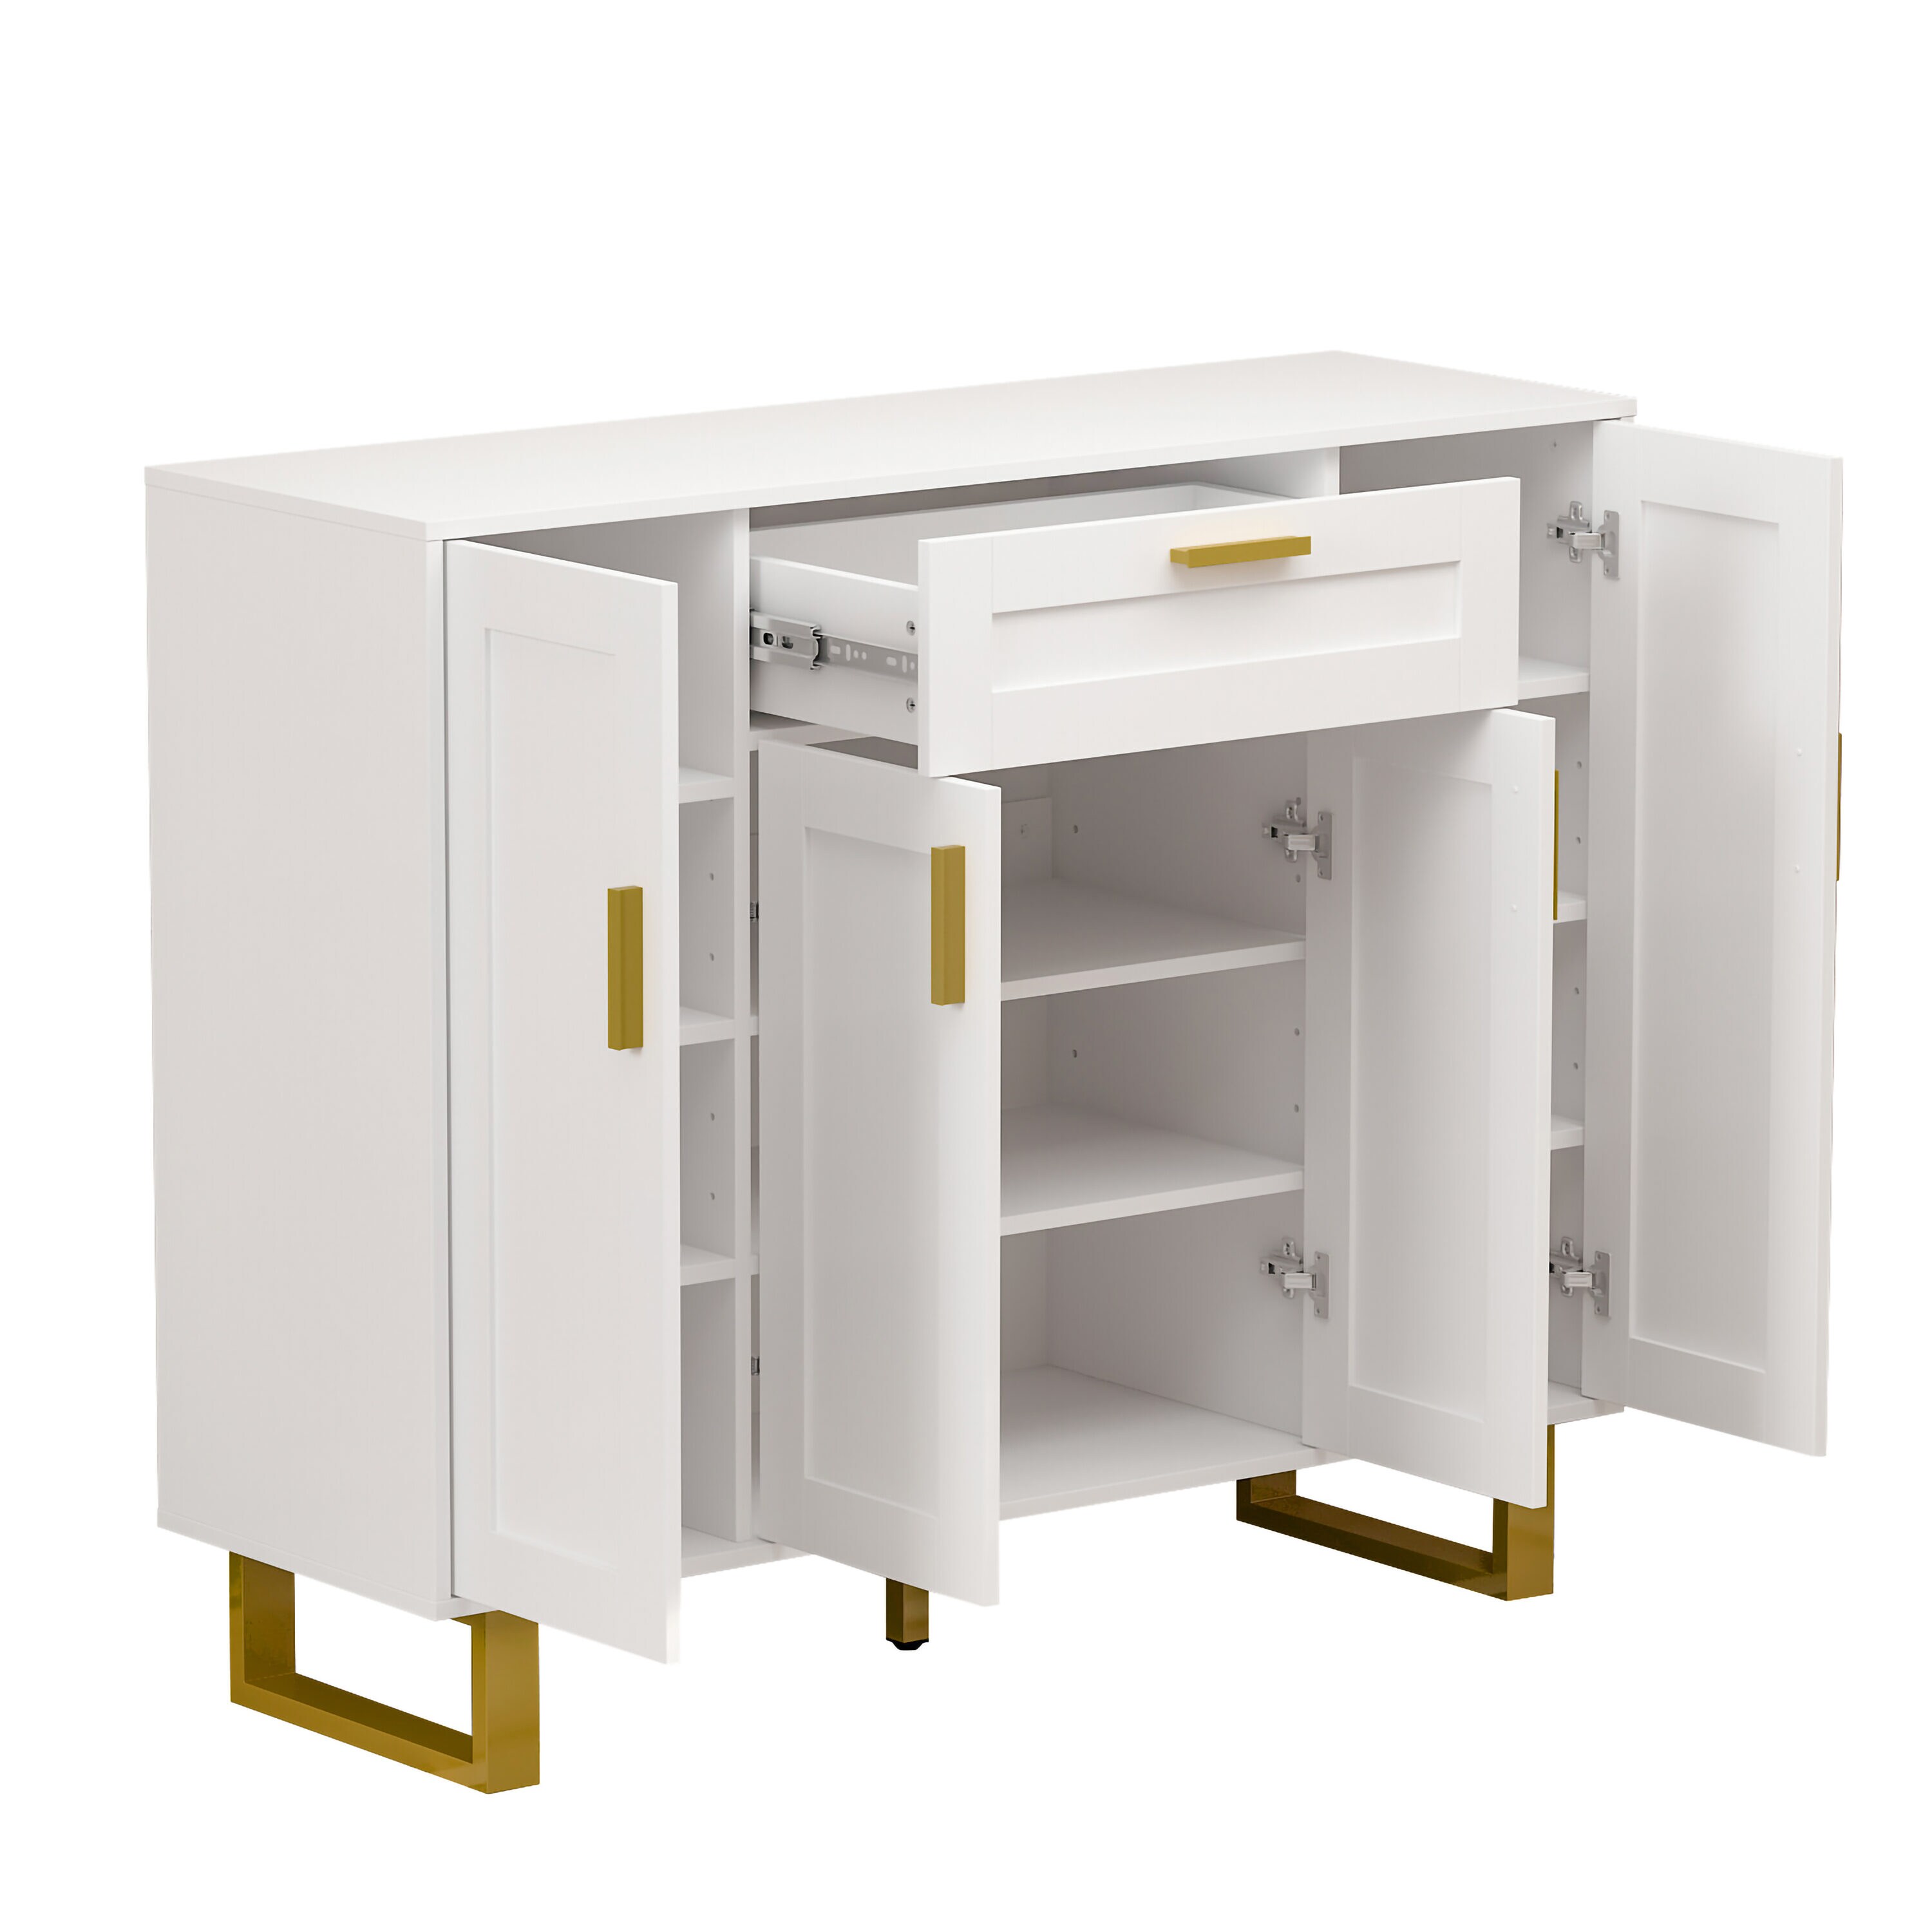 FUFU&GAGA 70.9-in H 8 Tier 14 Pair White Wood Shoe Cabinet in the